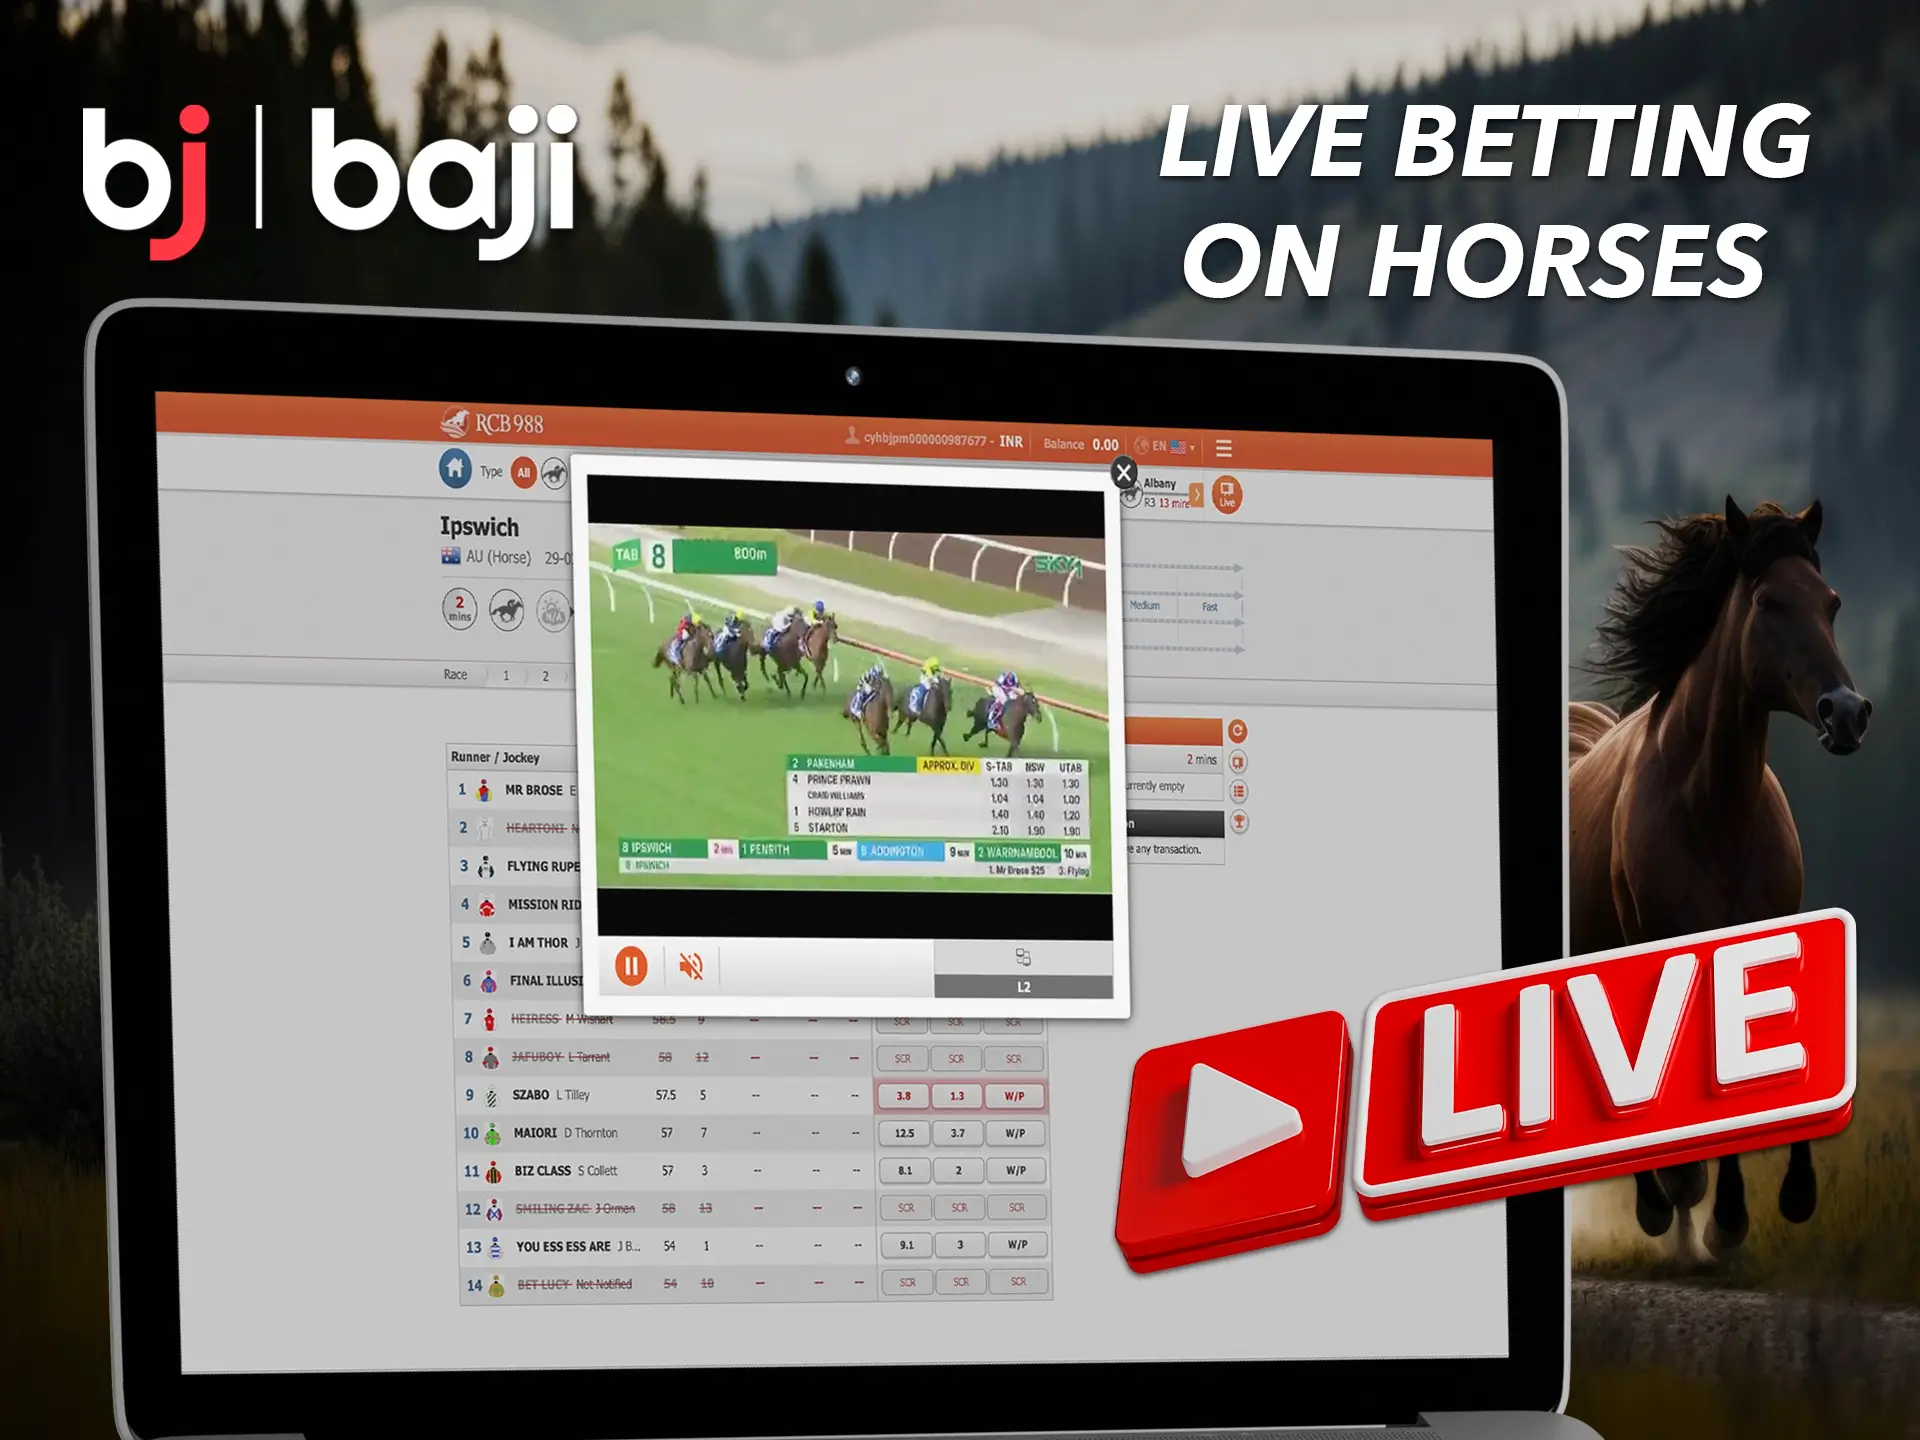 Watch the race live on the Baji website and place your bets based on the positions of your favourites in the race.